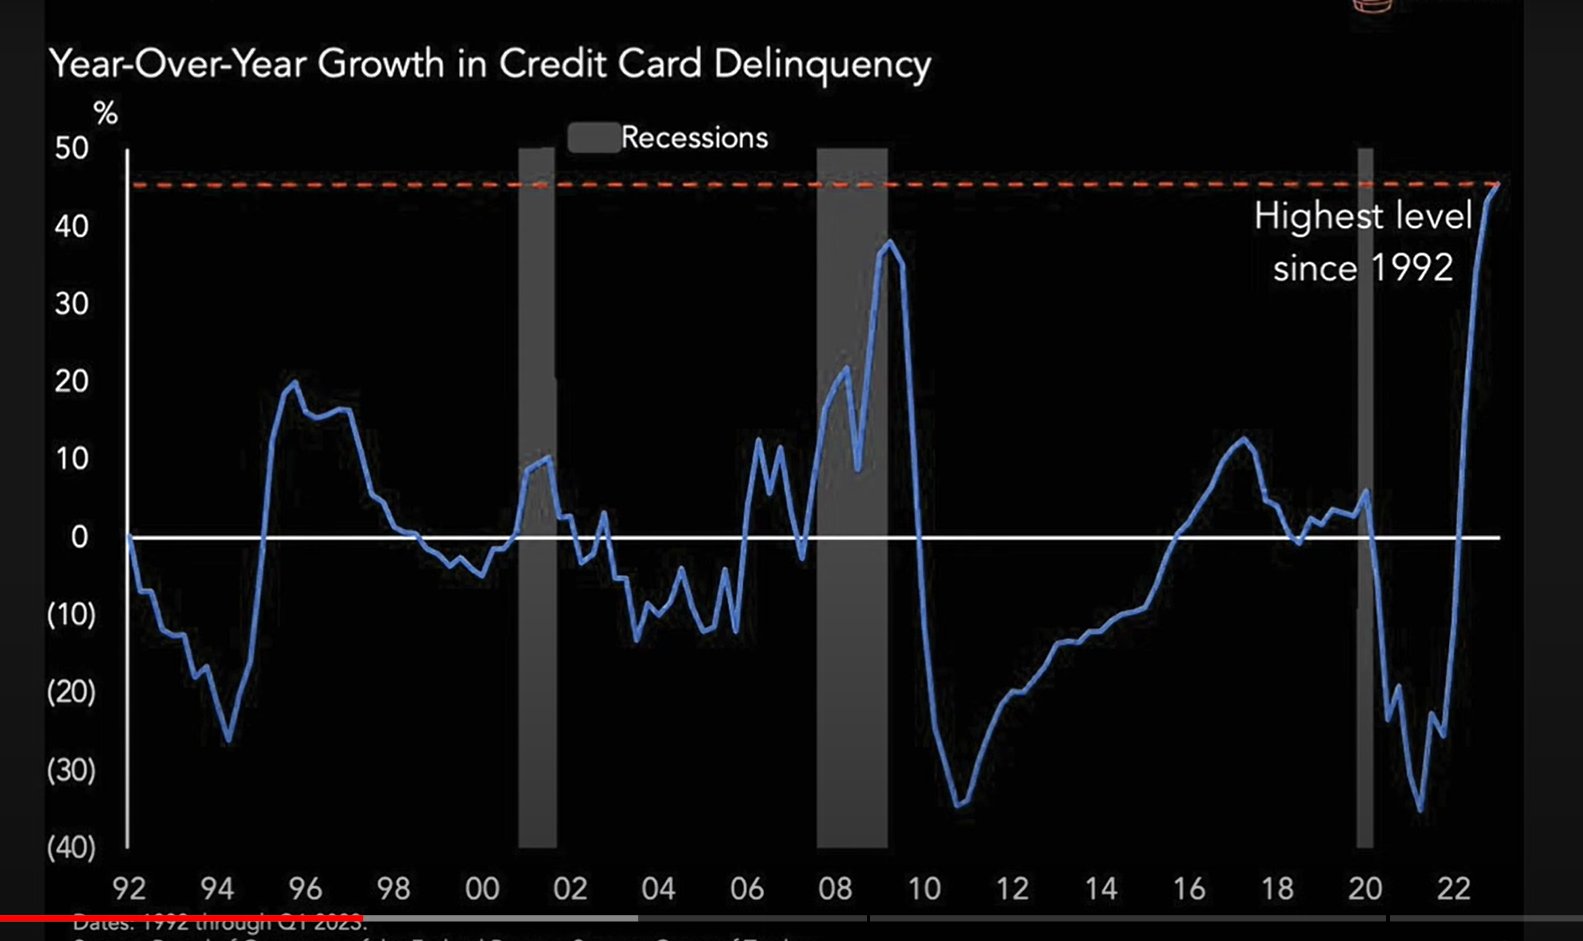 Credit Card Delinquency Rate - 1992-3Q23